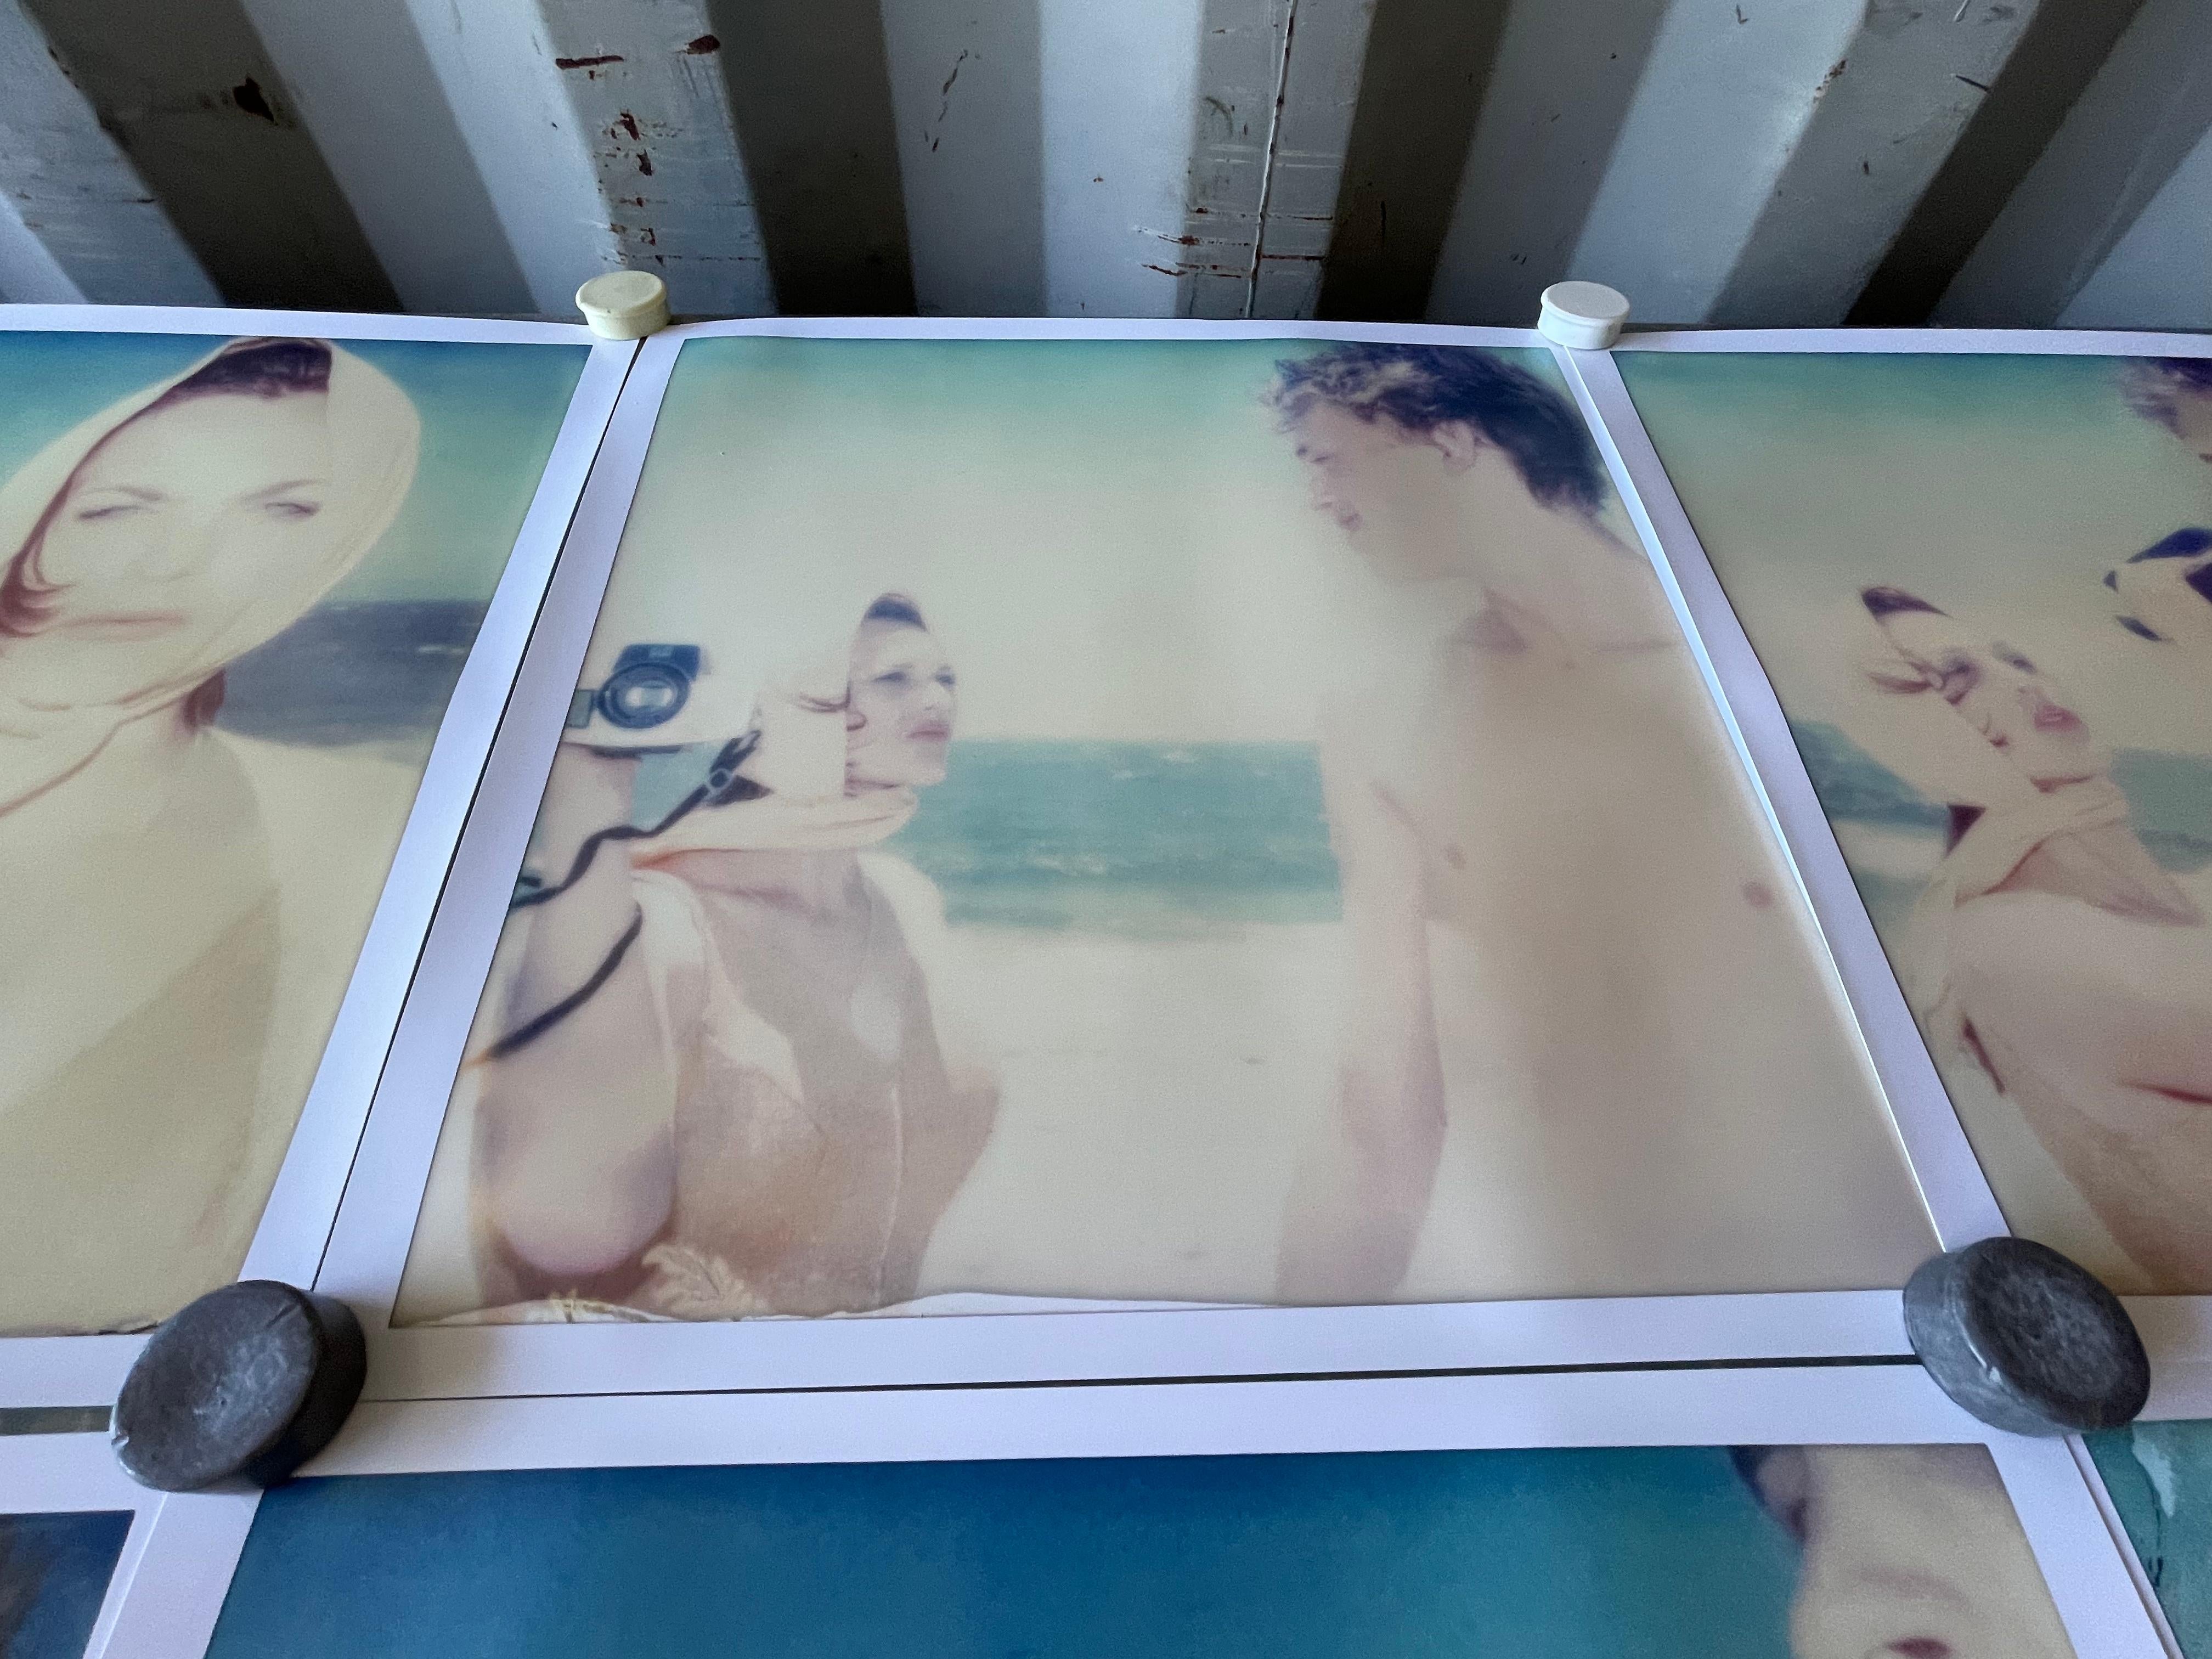 The Diva and the Boy (Beachshoot) - 2005

Edition of 10 plus 2 artist Proofs. 
48x46cm each, installed 155x151cm. 
9 archival C-Prints, based on 9 Polaroids. 
Certificate and Signature label, 
artist Inventory # 1461. 
Not mounted.

Beach